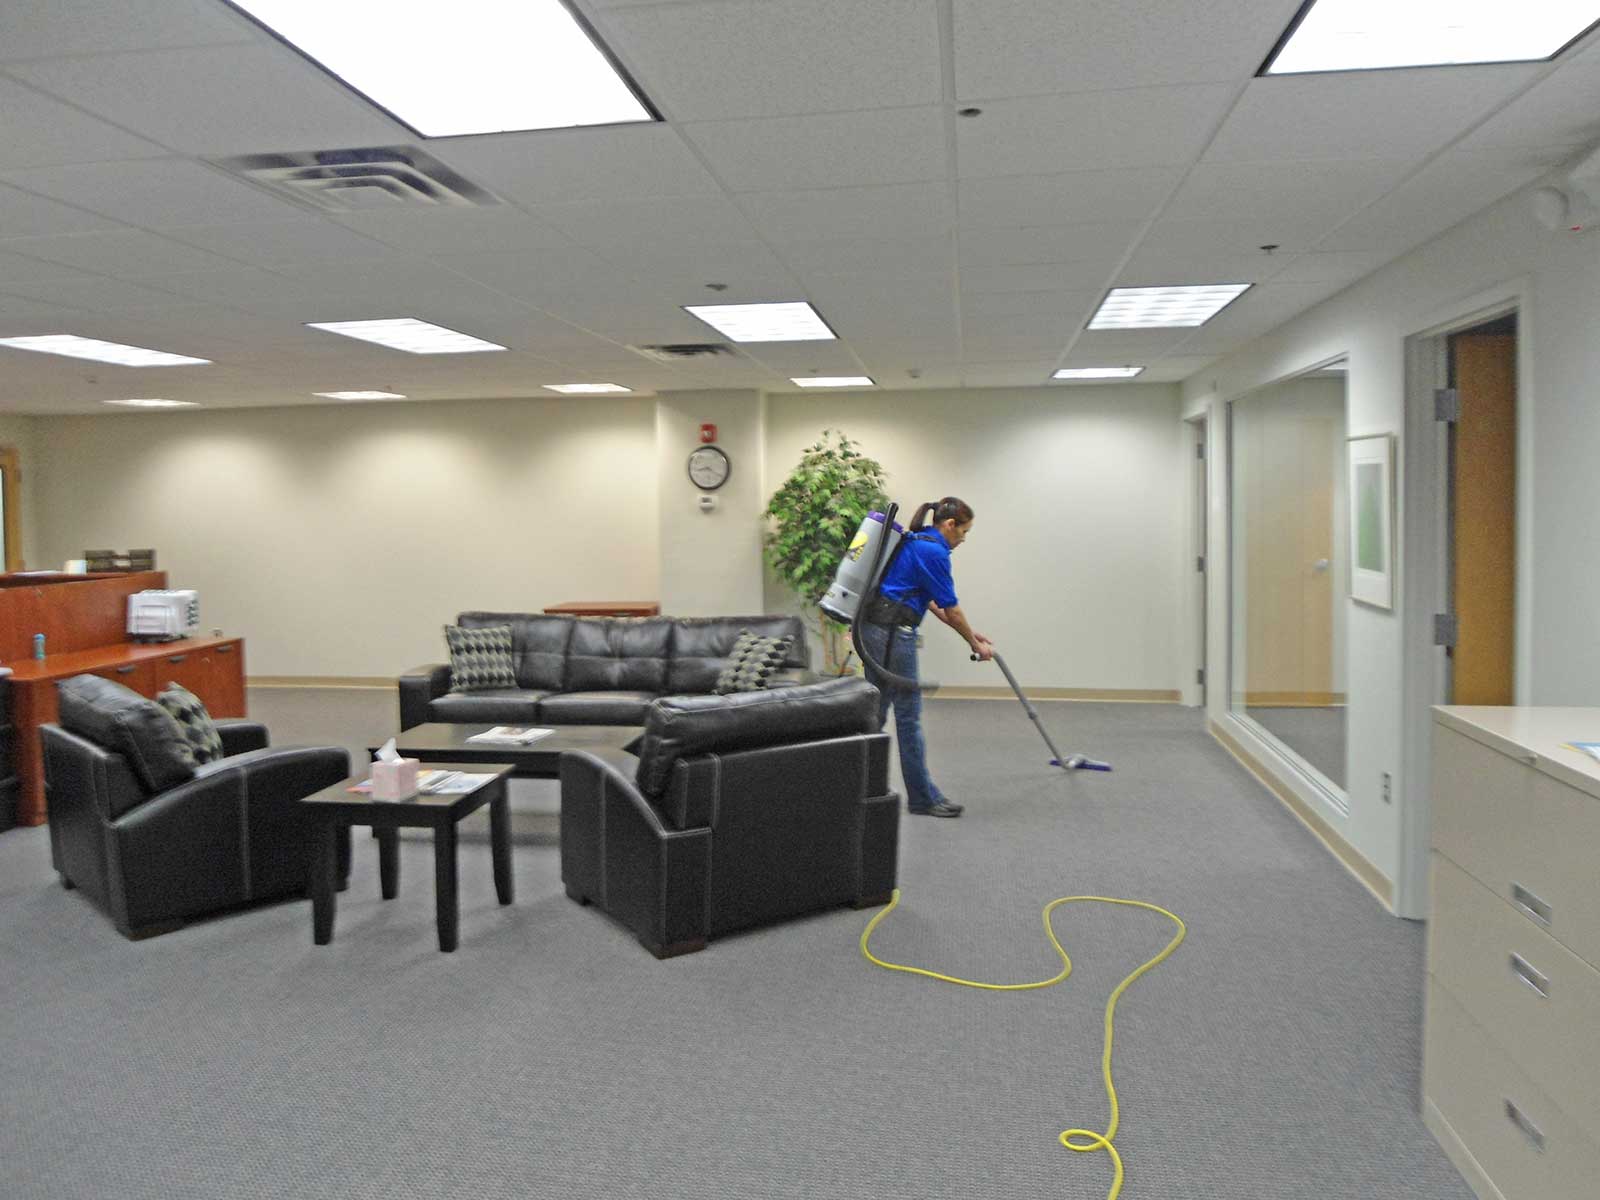 Commercial Carpet Cleaning - One Source Inc.